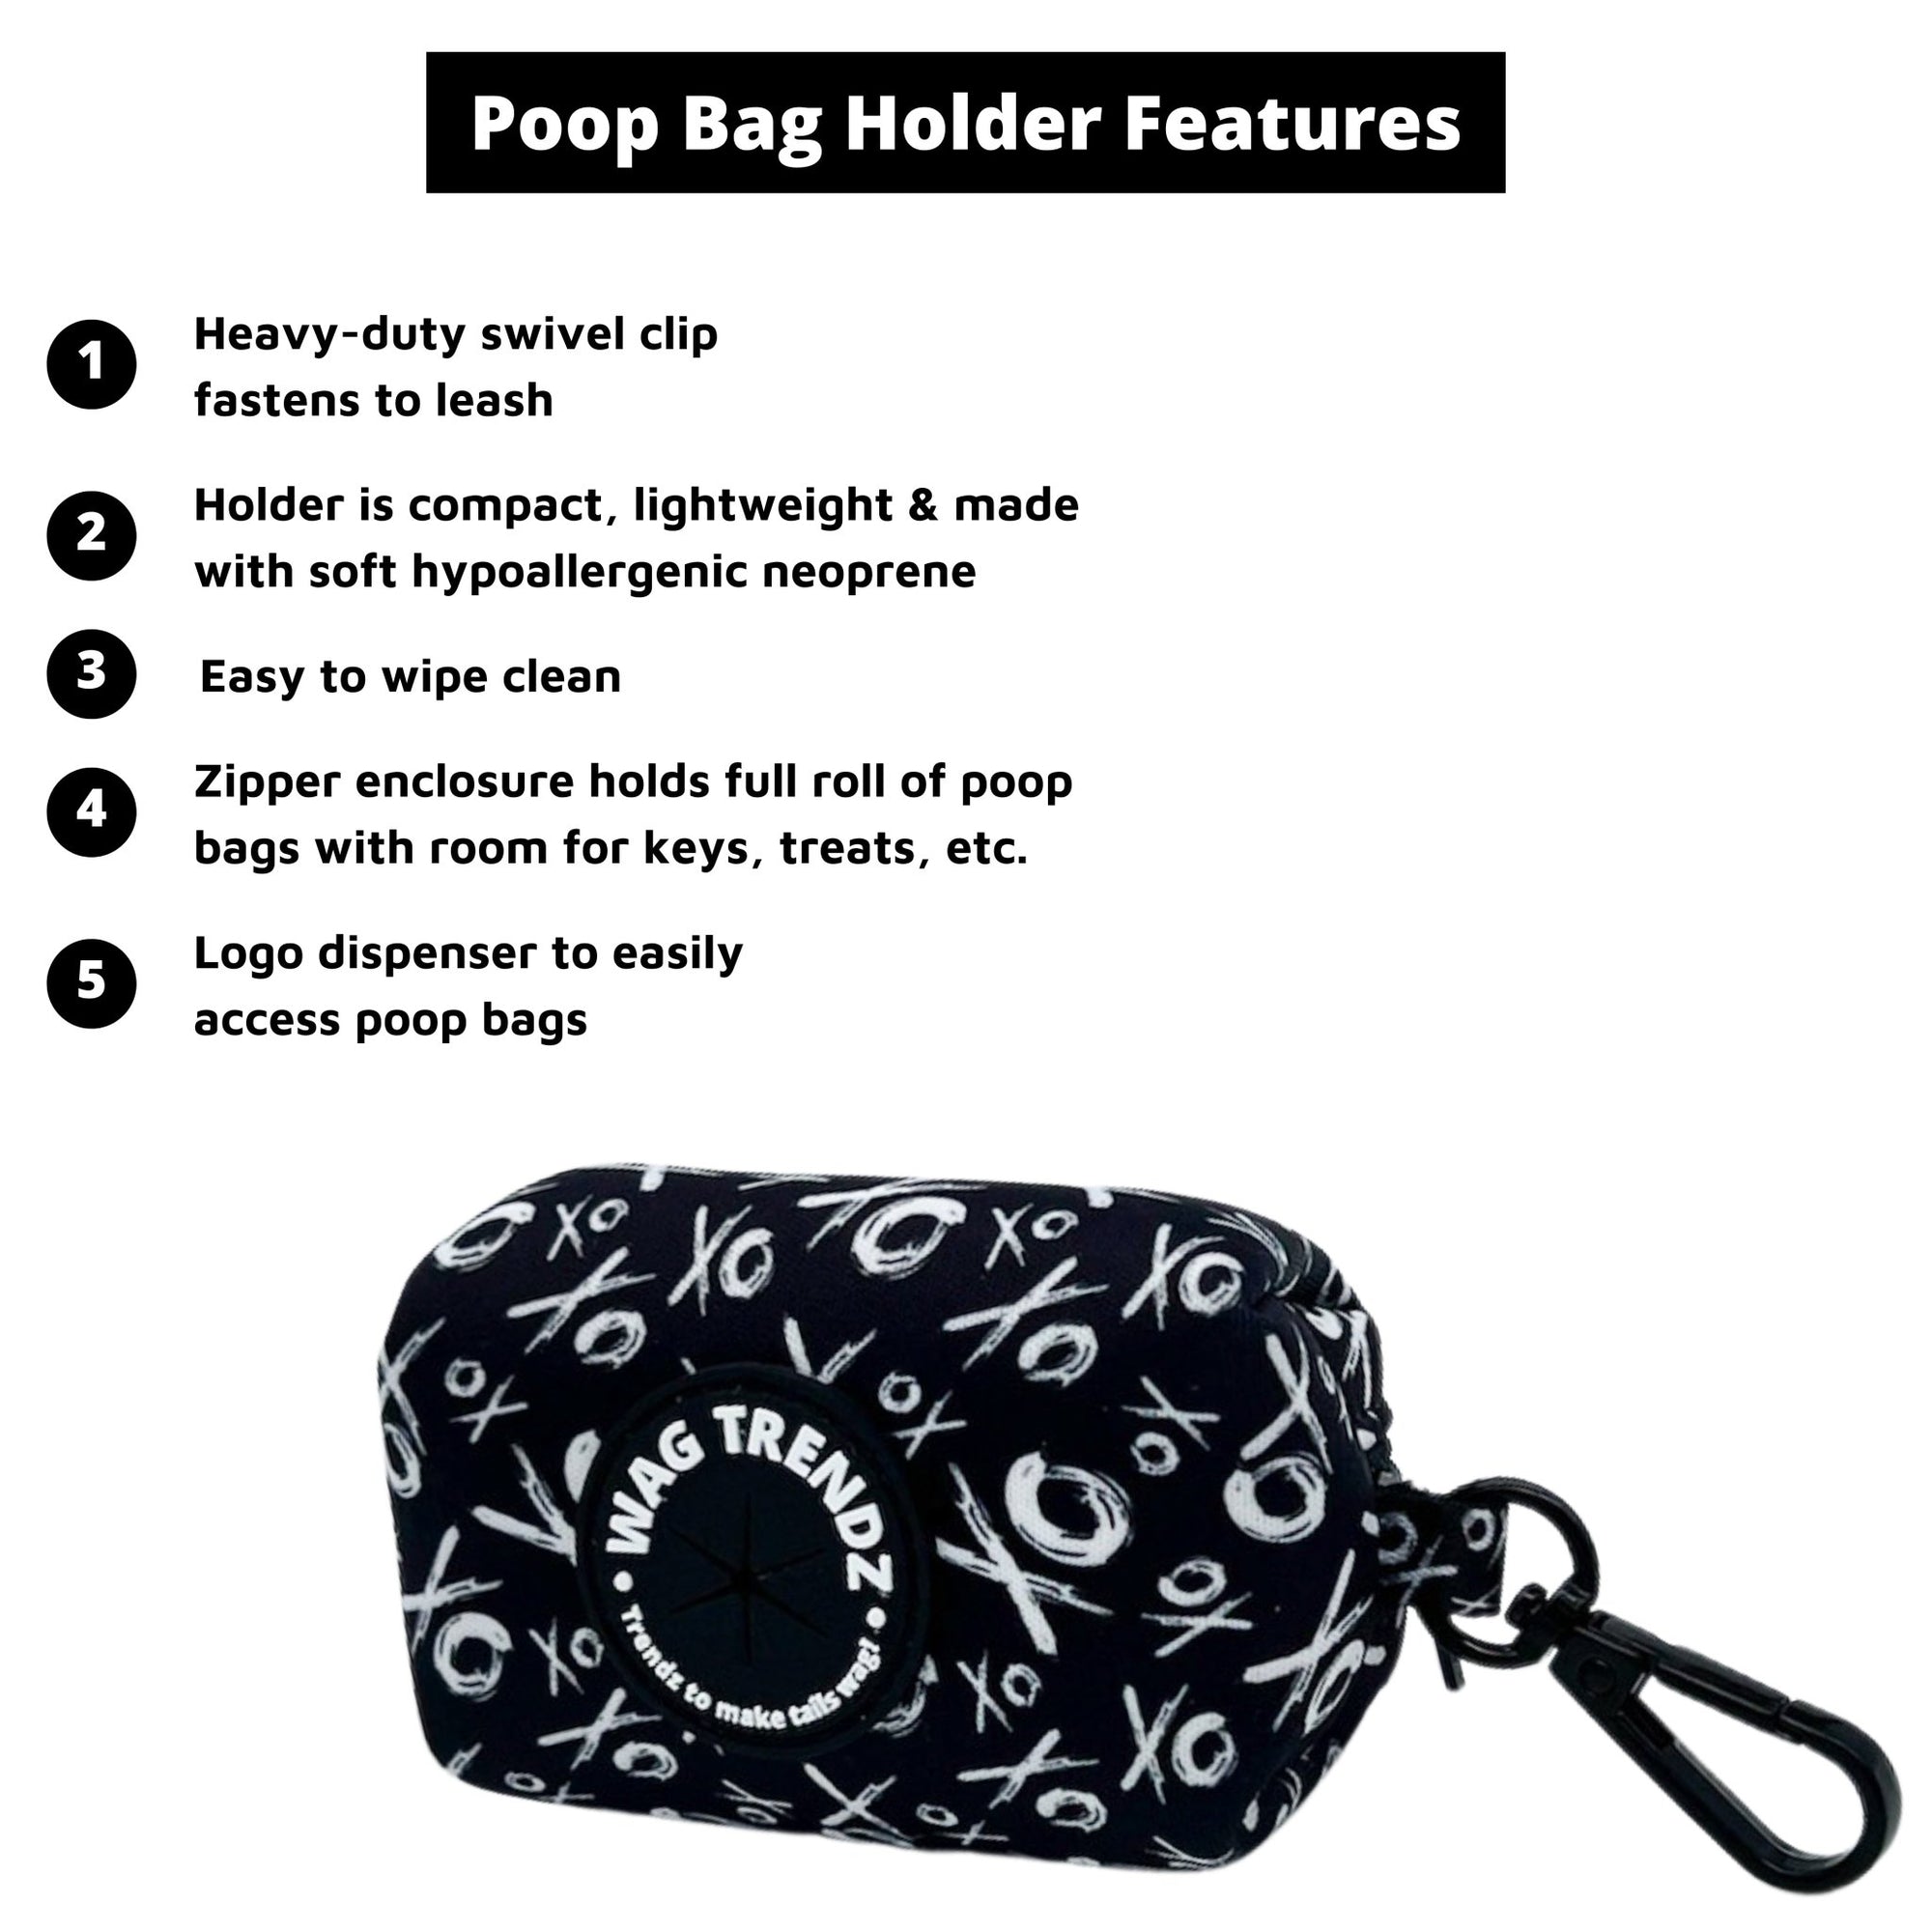 Dog Poo Bag Holder - black &amp; white XO pattern - Hugs &amp; Kisses XO - against white background - with product feature captions - Wag Trendz